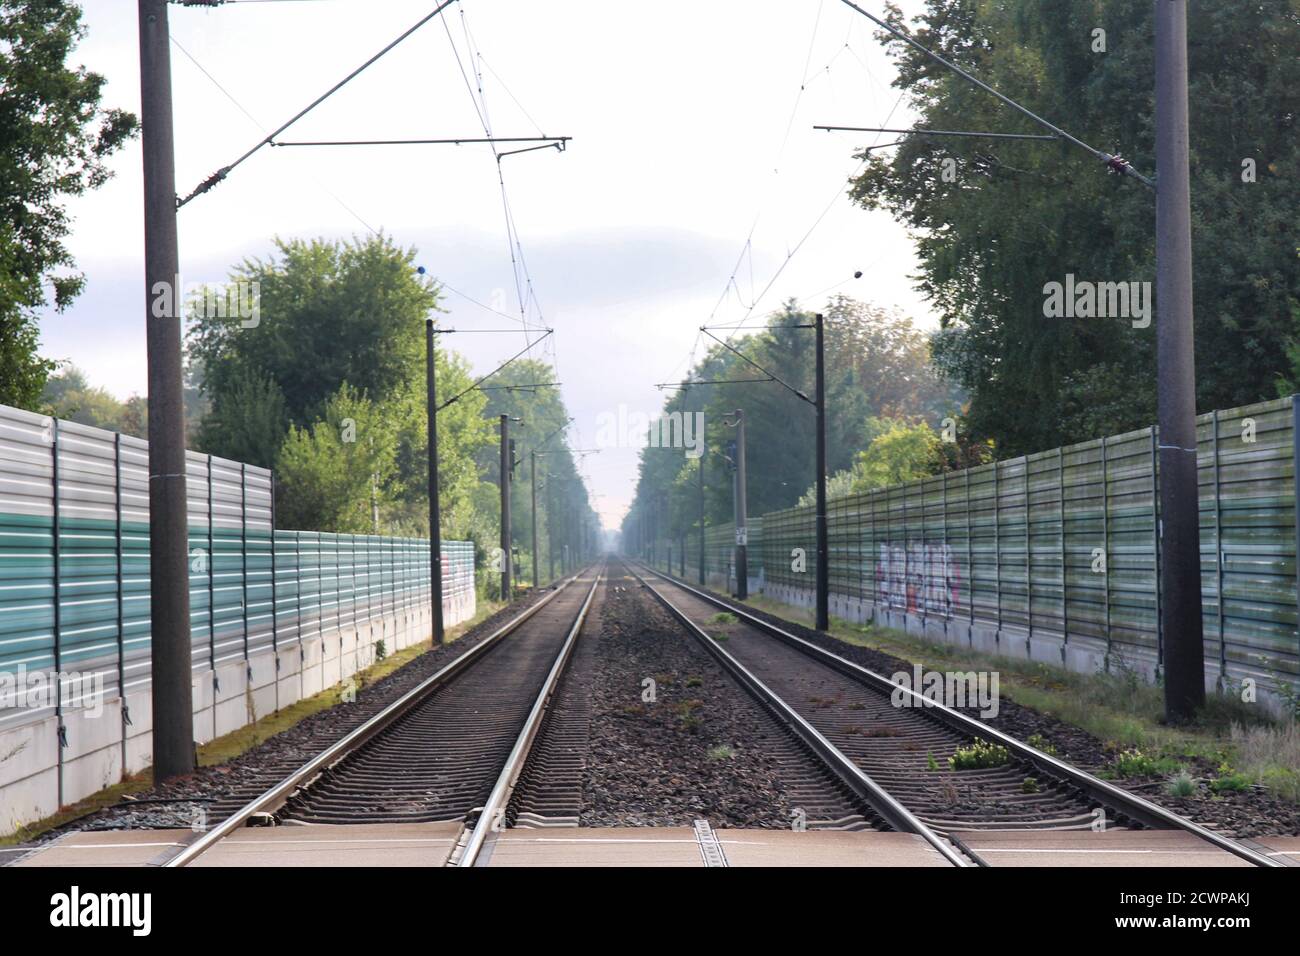 Railway tracks with noise protection walls and trees at the side Stock Photo